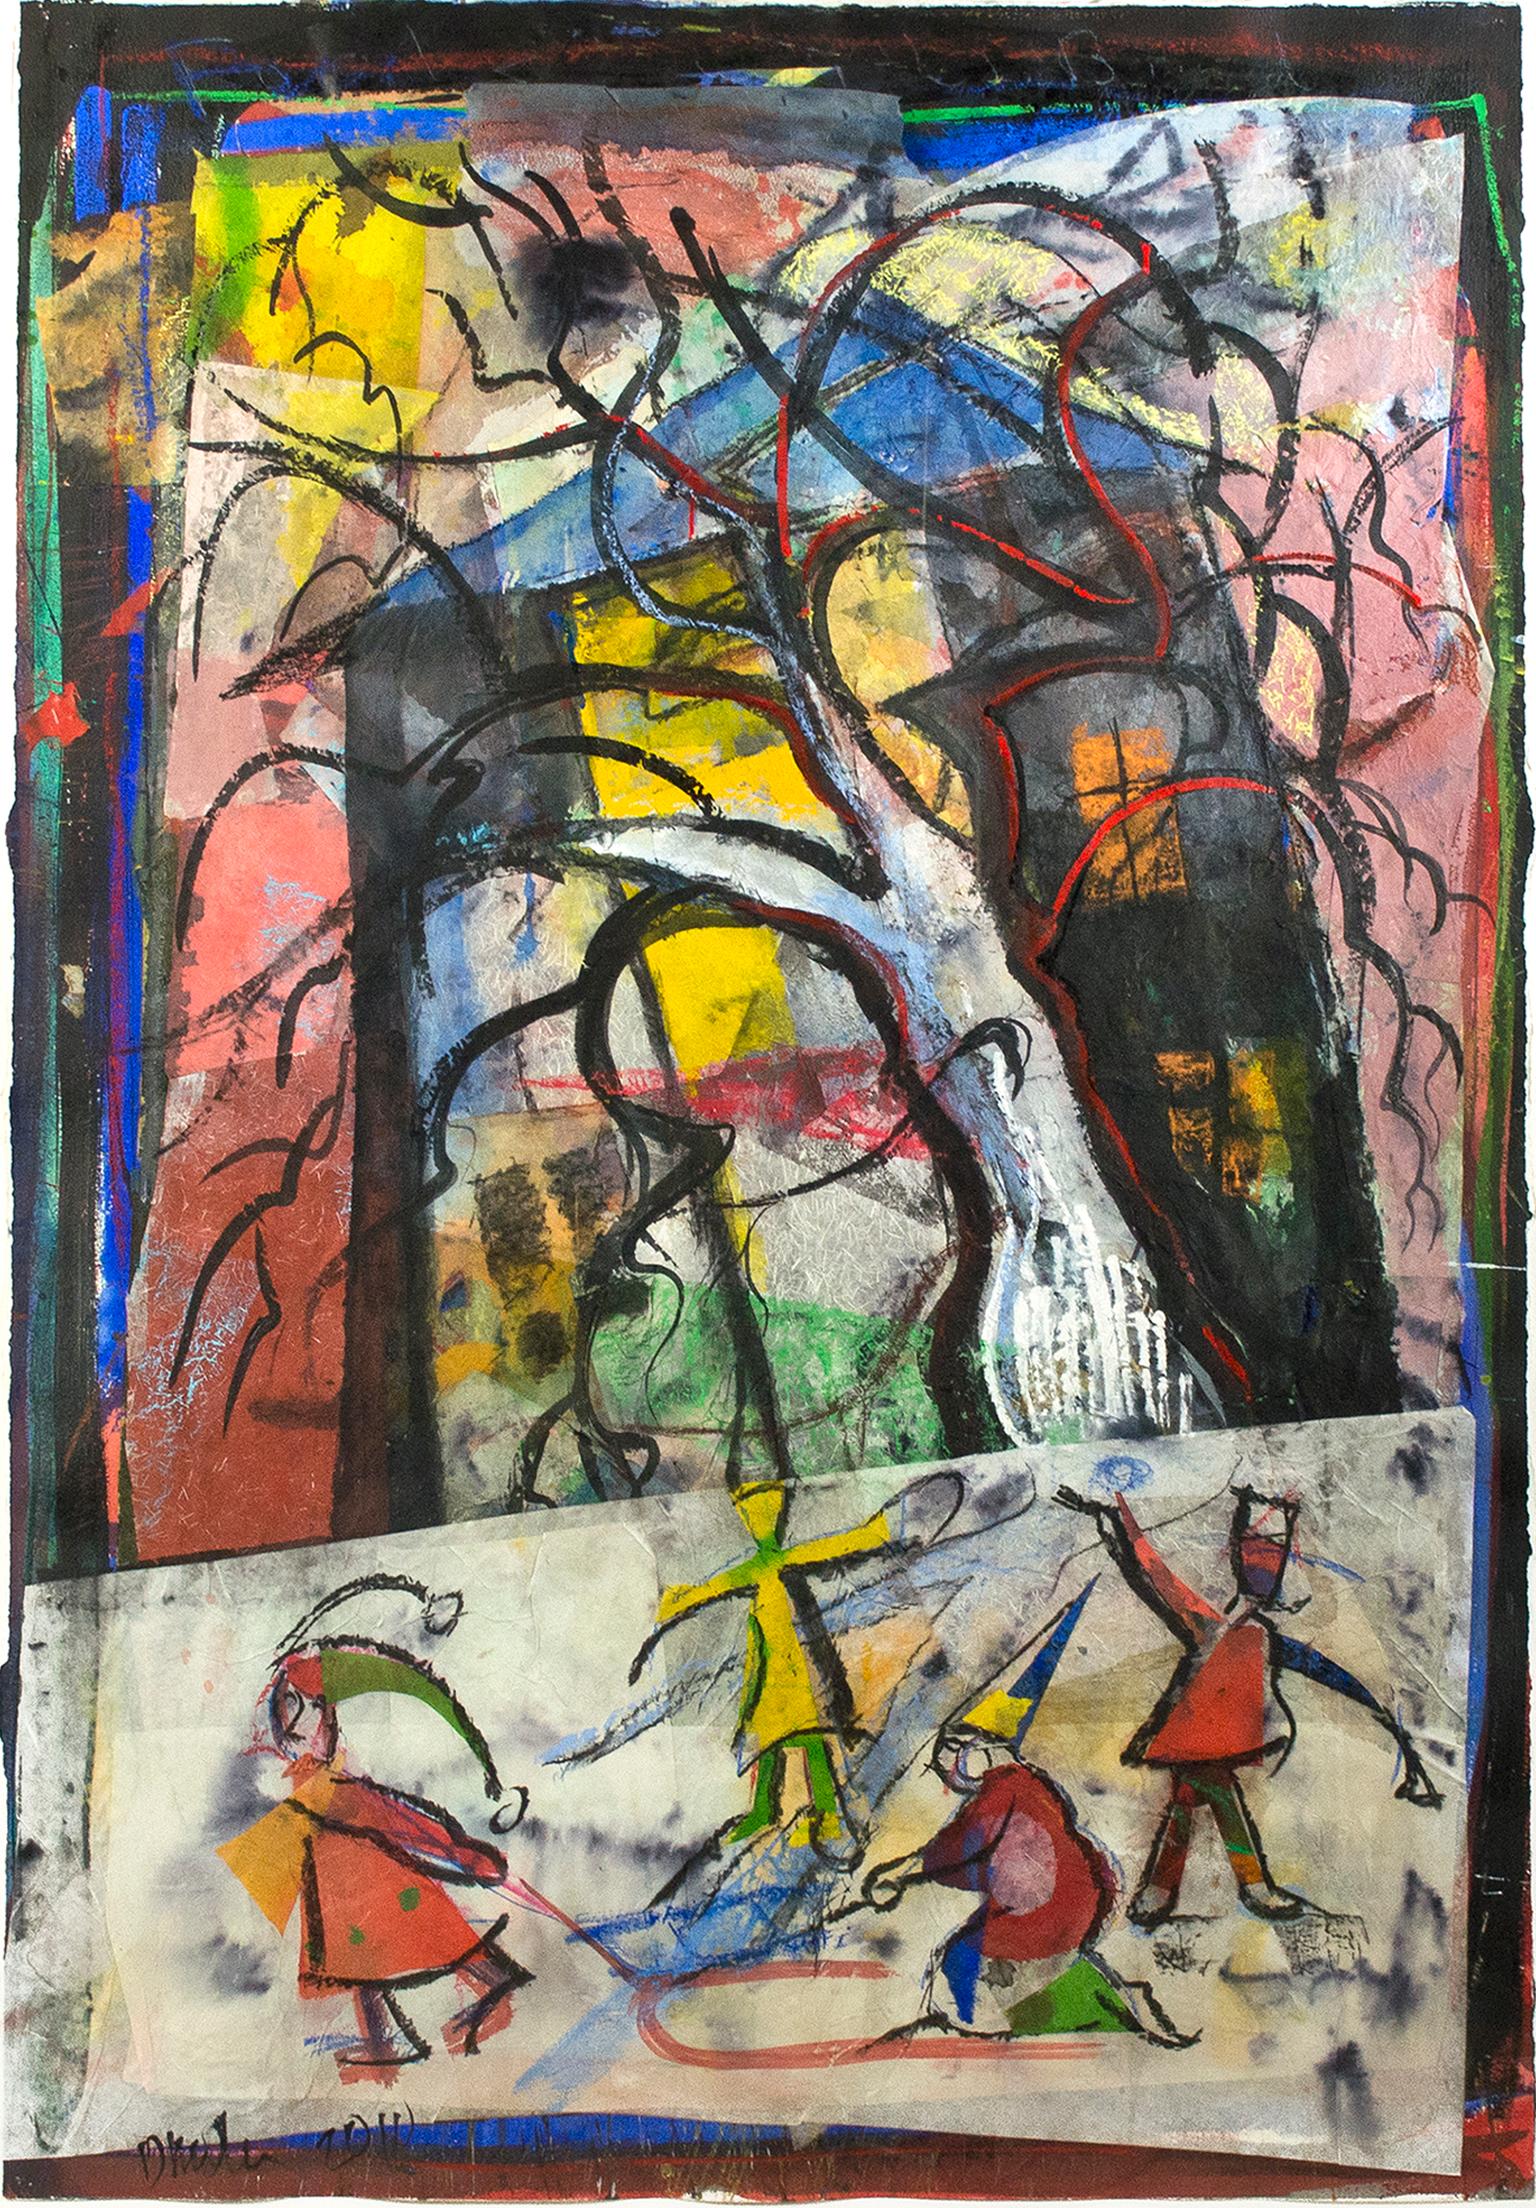 "Sledding by the Big Tree, " Colorful Mixed Media Collage Painting by Dan Muller